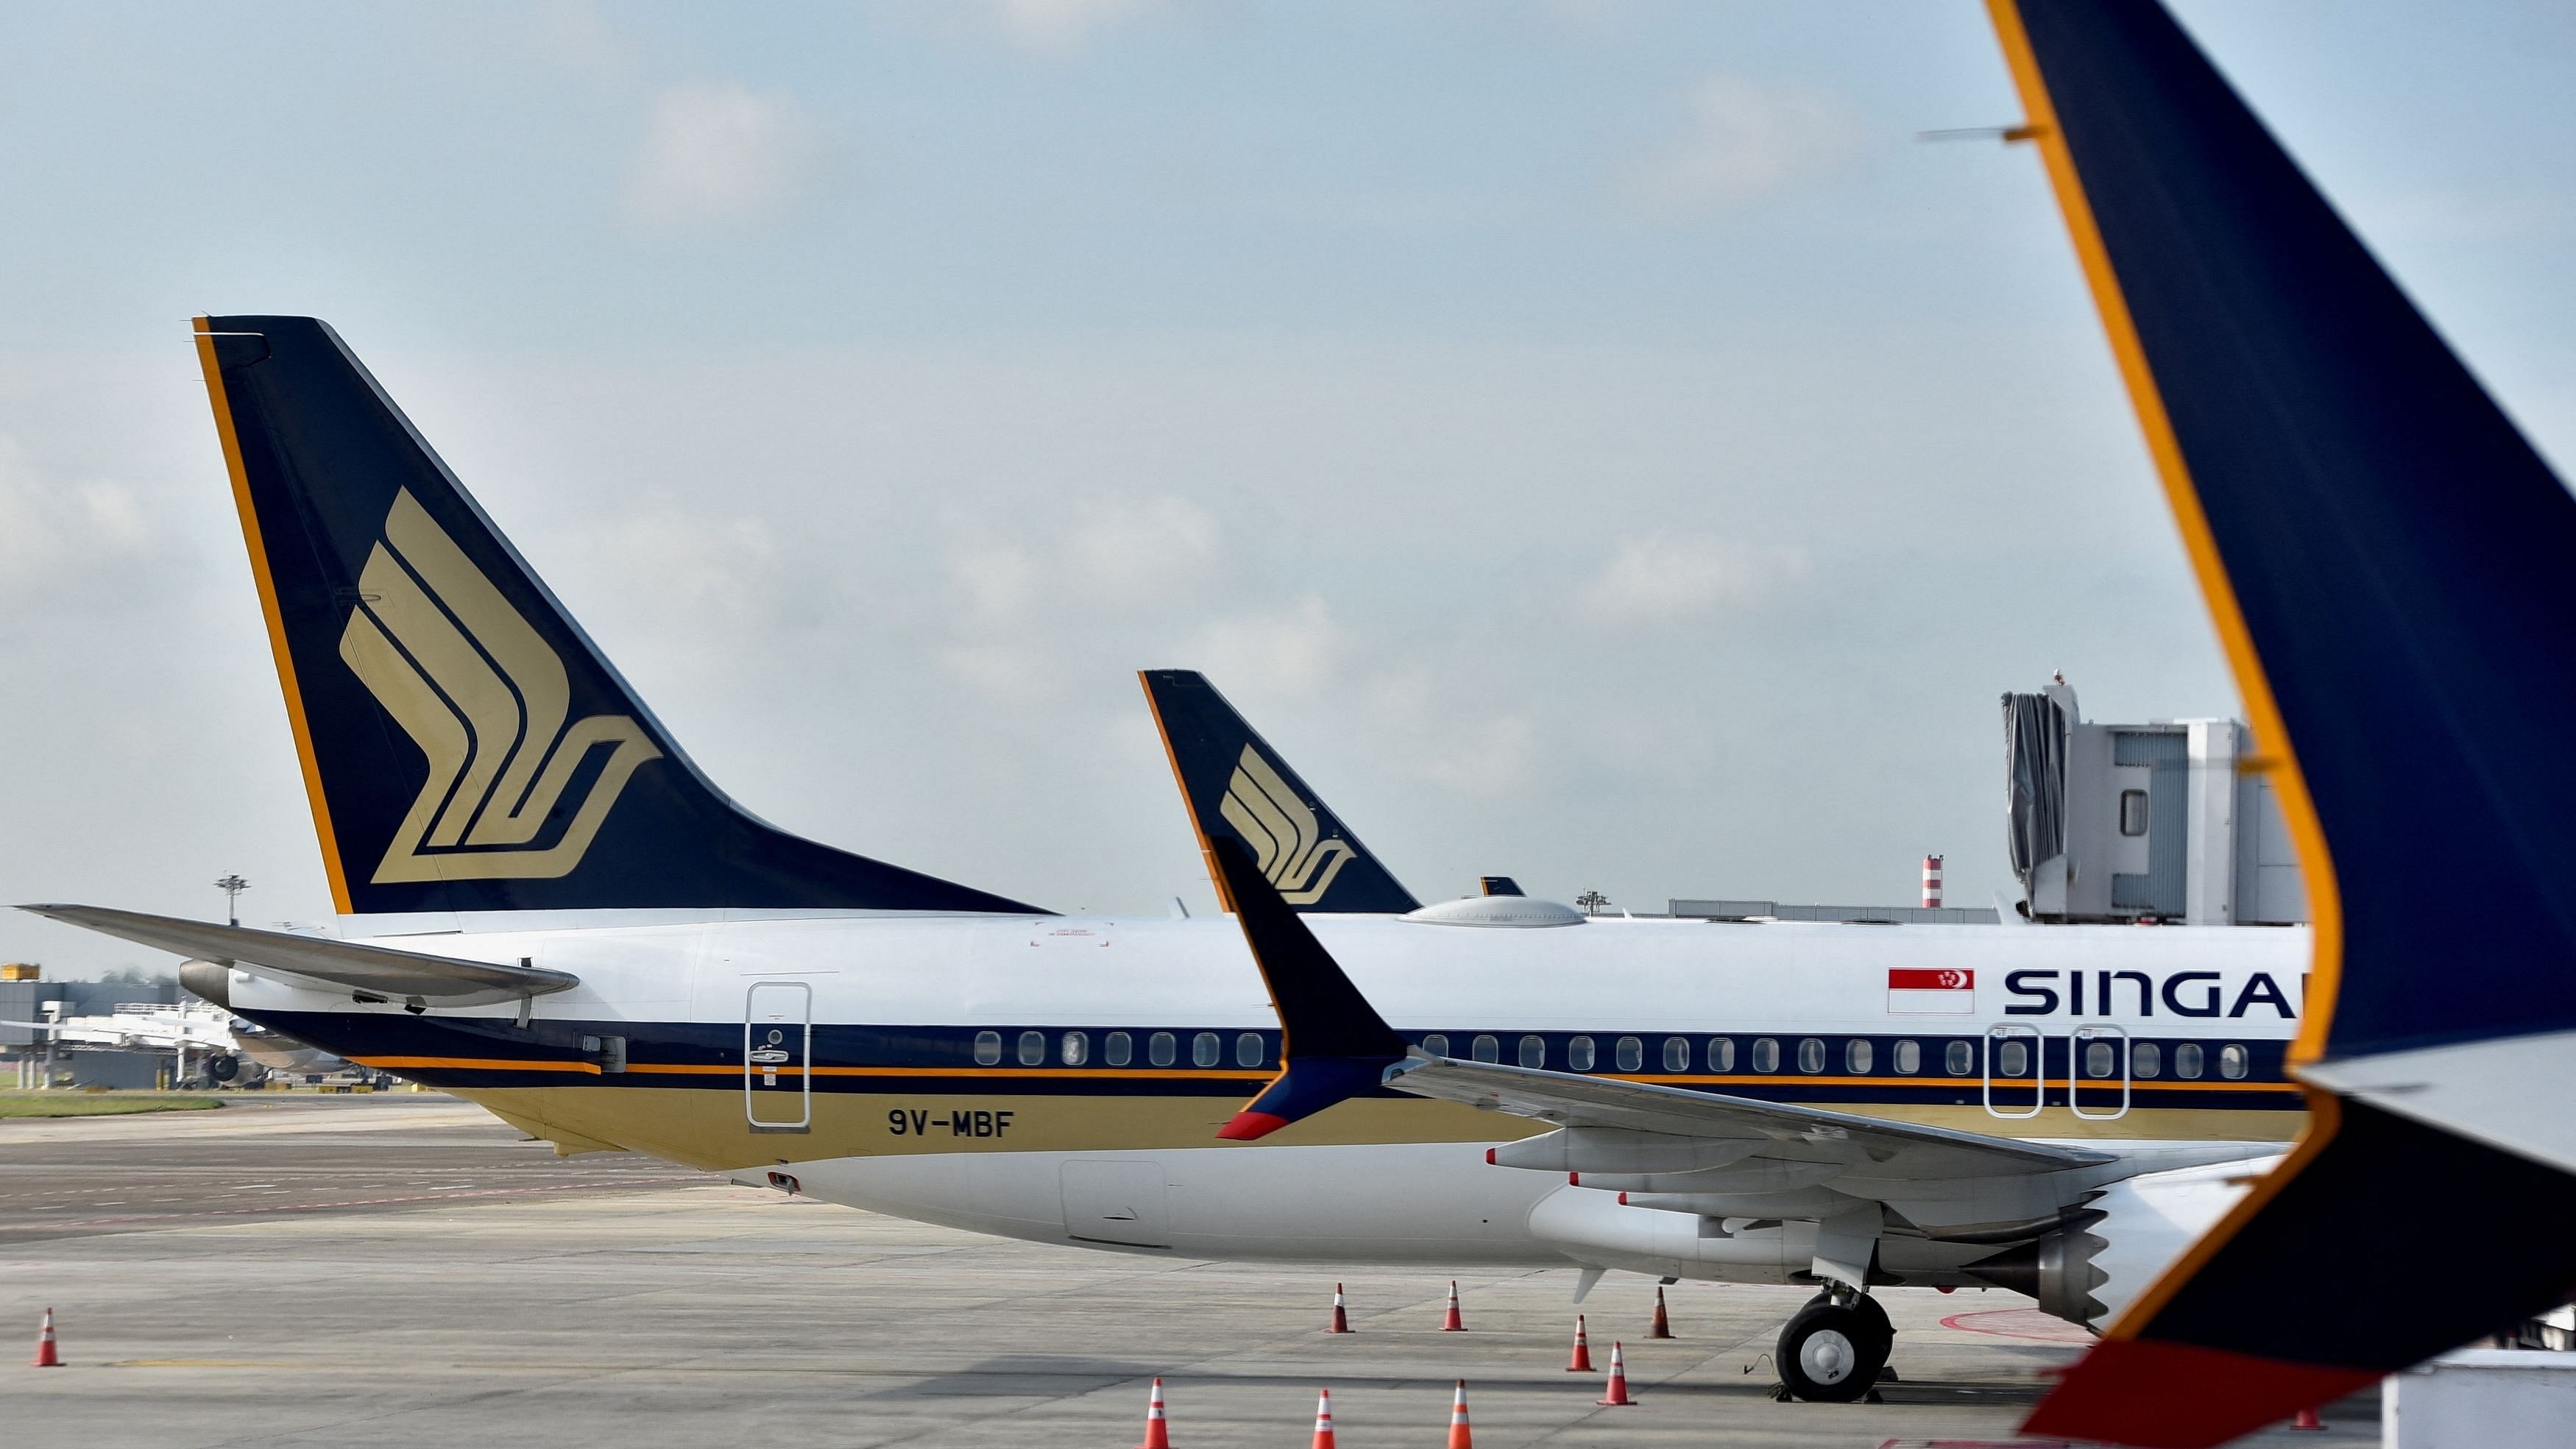 <div class="paragraphs"><p>Singapore Airlines planes sit on the tarmac at Changi Airport in Singapore.&nbsp;</p></div>